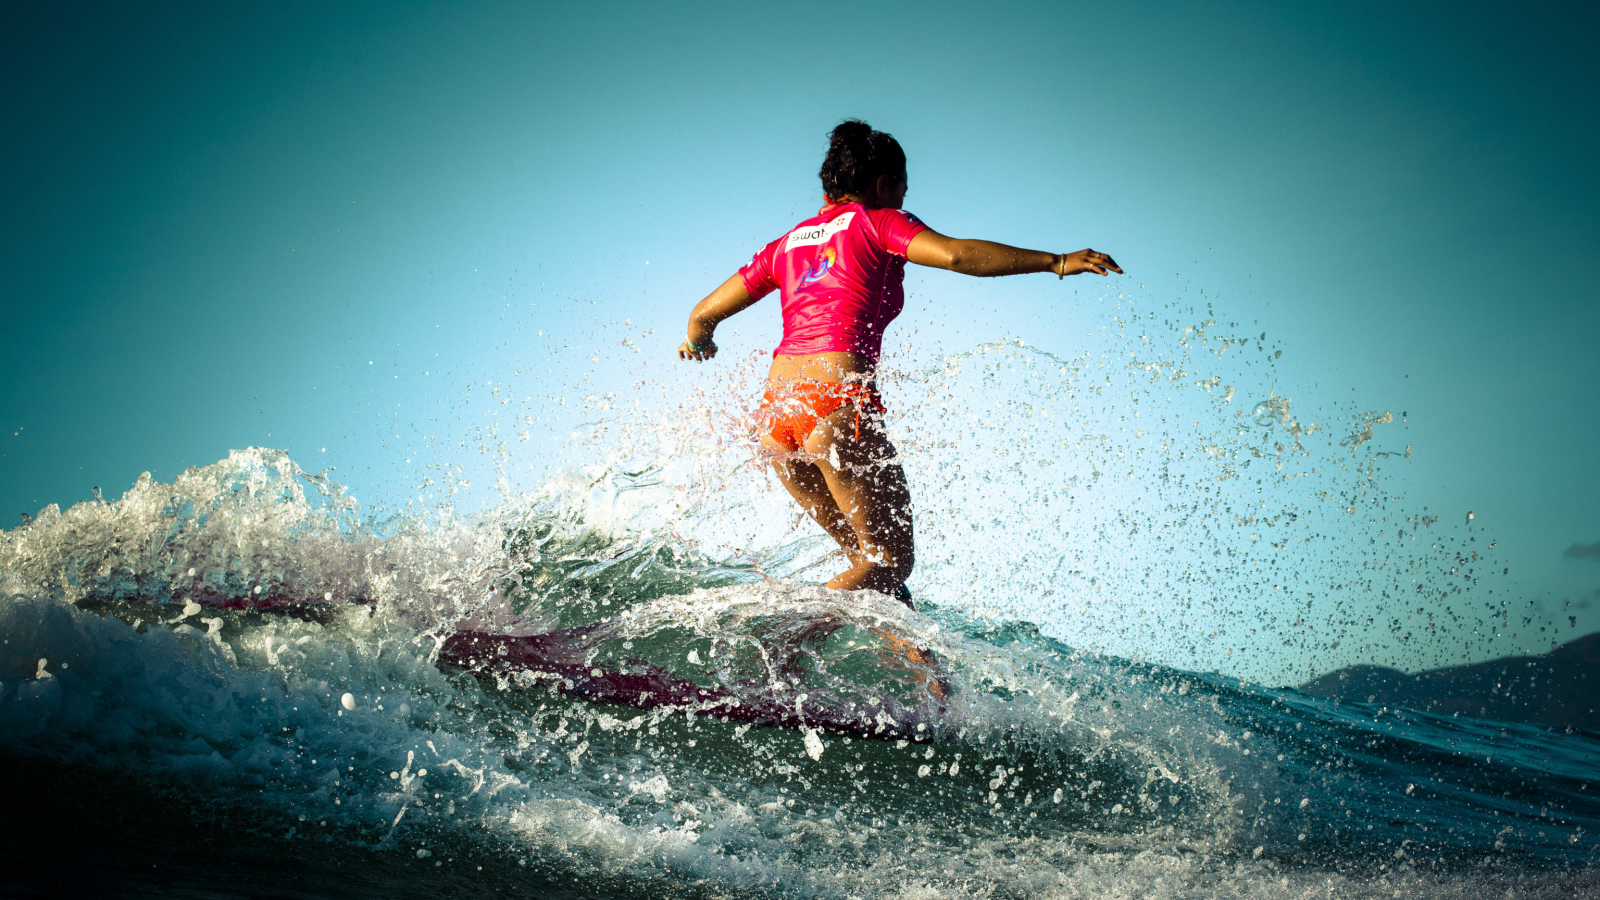 Colorful Surfing wallpaper 1600x900